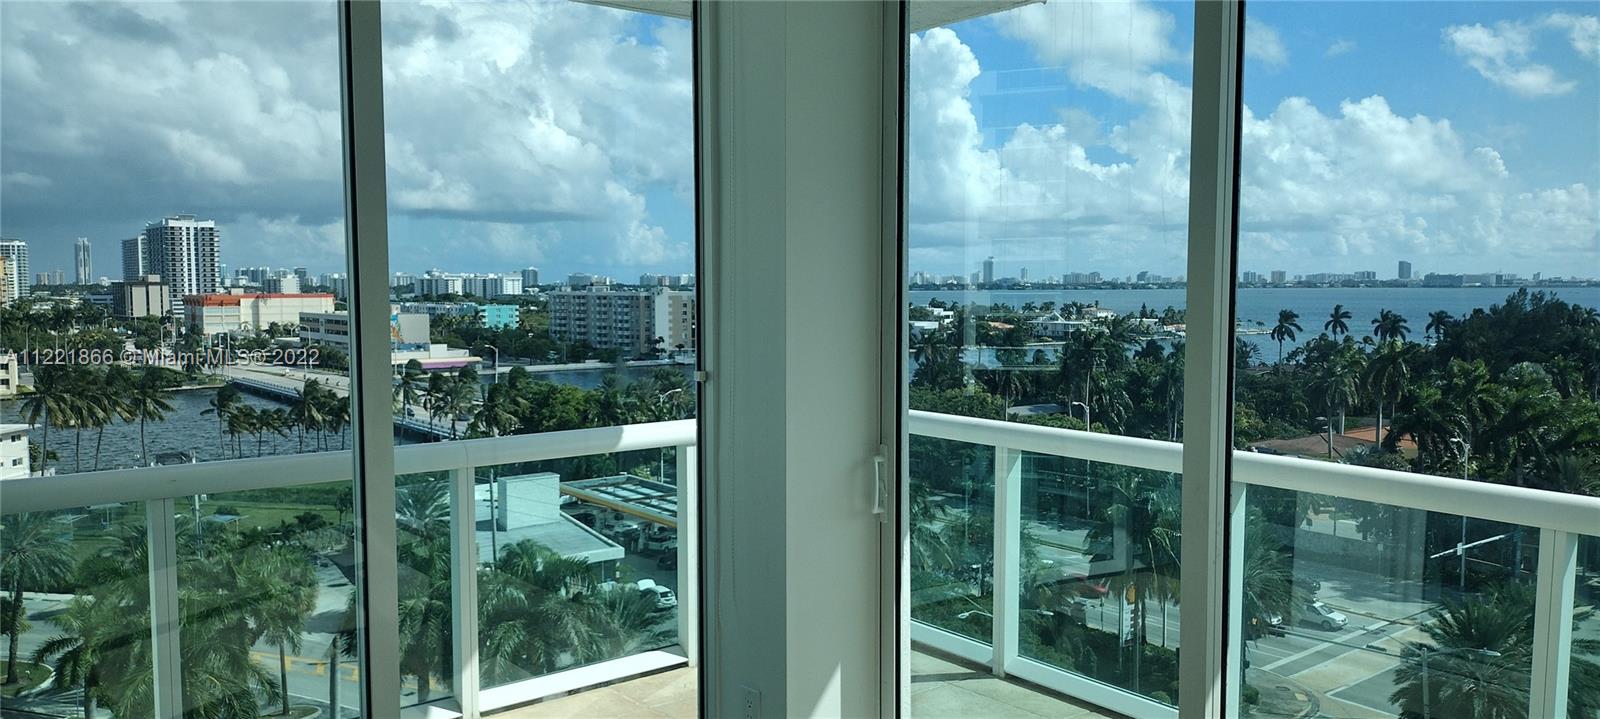 7900  Harbor Island Dr #925 For Sale A11221866, FL